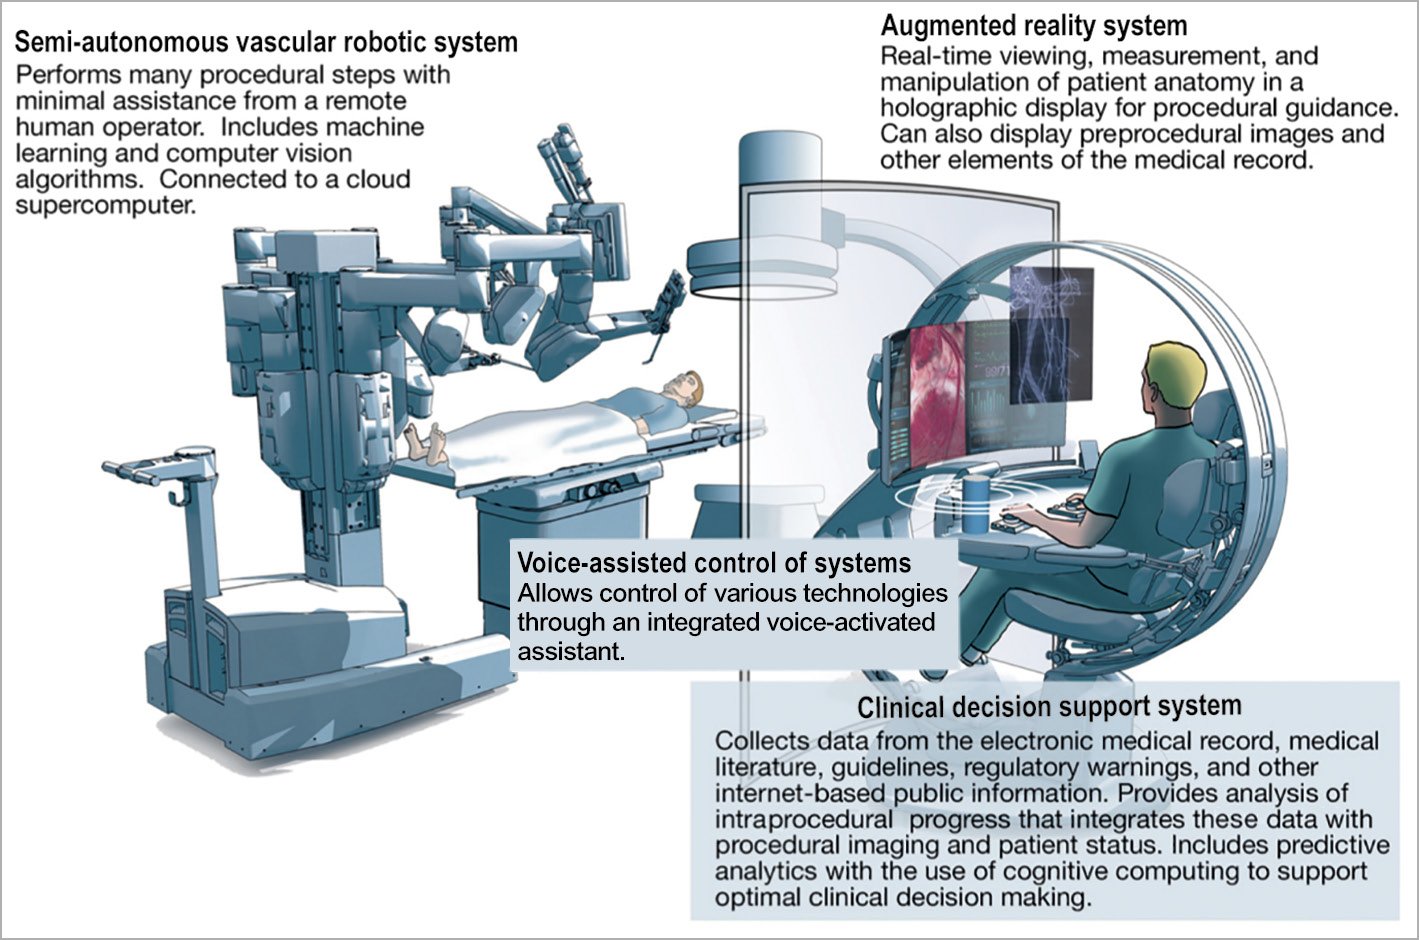 Figure 5. The future catheterisation laboratory with artificial intelligence-enabled technology, clinical decision support system, voice-powered virtual assistant, and augmented reality platforms. A semi-autonomous/autonomous robotic system can provide optimisation as well as the remote operations presented above. Reprinted from Figure 2 of Sardar et al30, copyright (2019), with permission from Elsevier.